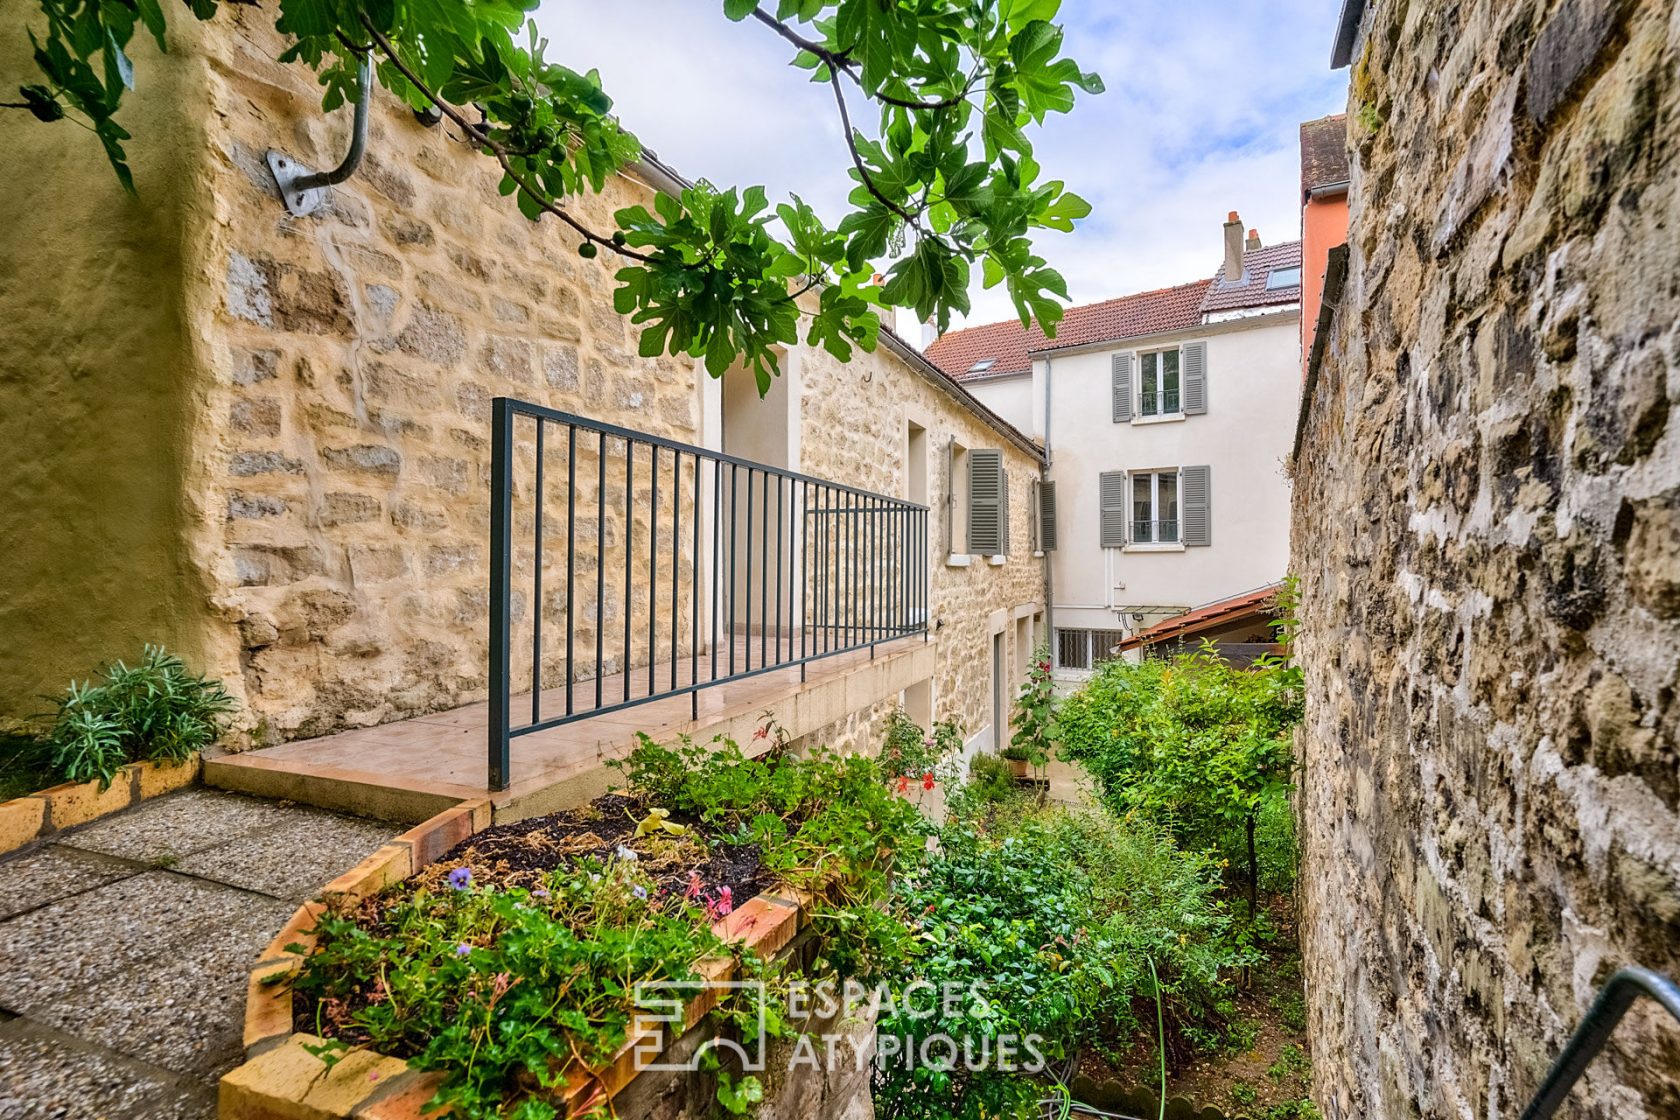 Townhouse with courtyard and hanging gardens St Wandrille